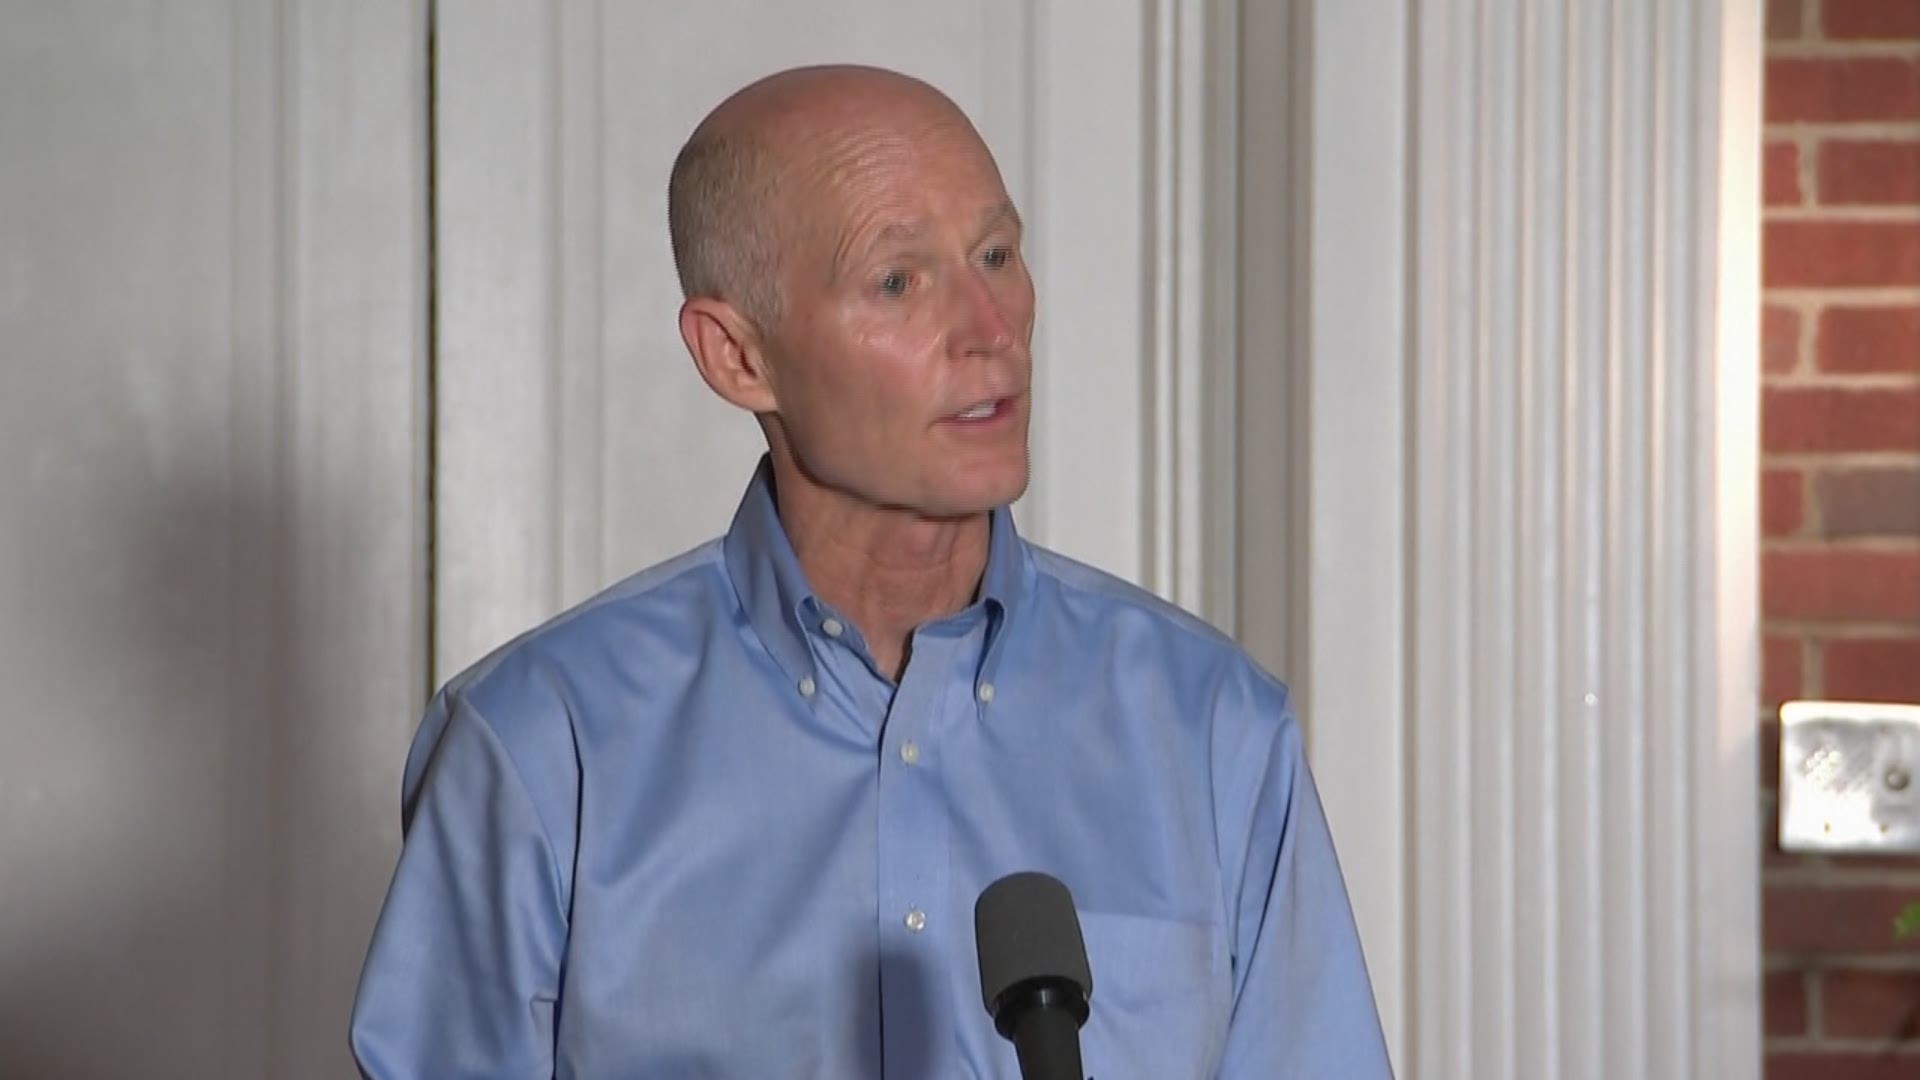 Florida Gov. Rick Scott's campaign for Senate and the National Republican Senatorial Committee have filed a lawsuit as his leading vote margin continues to fall.